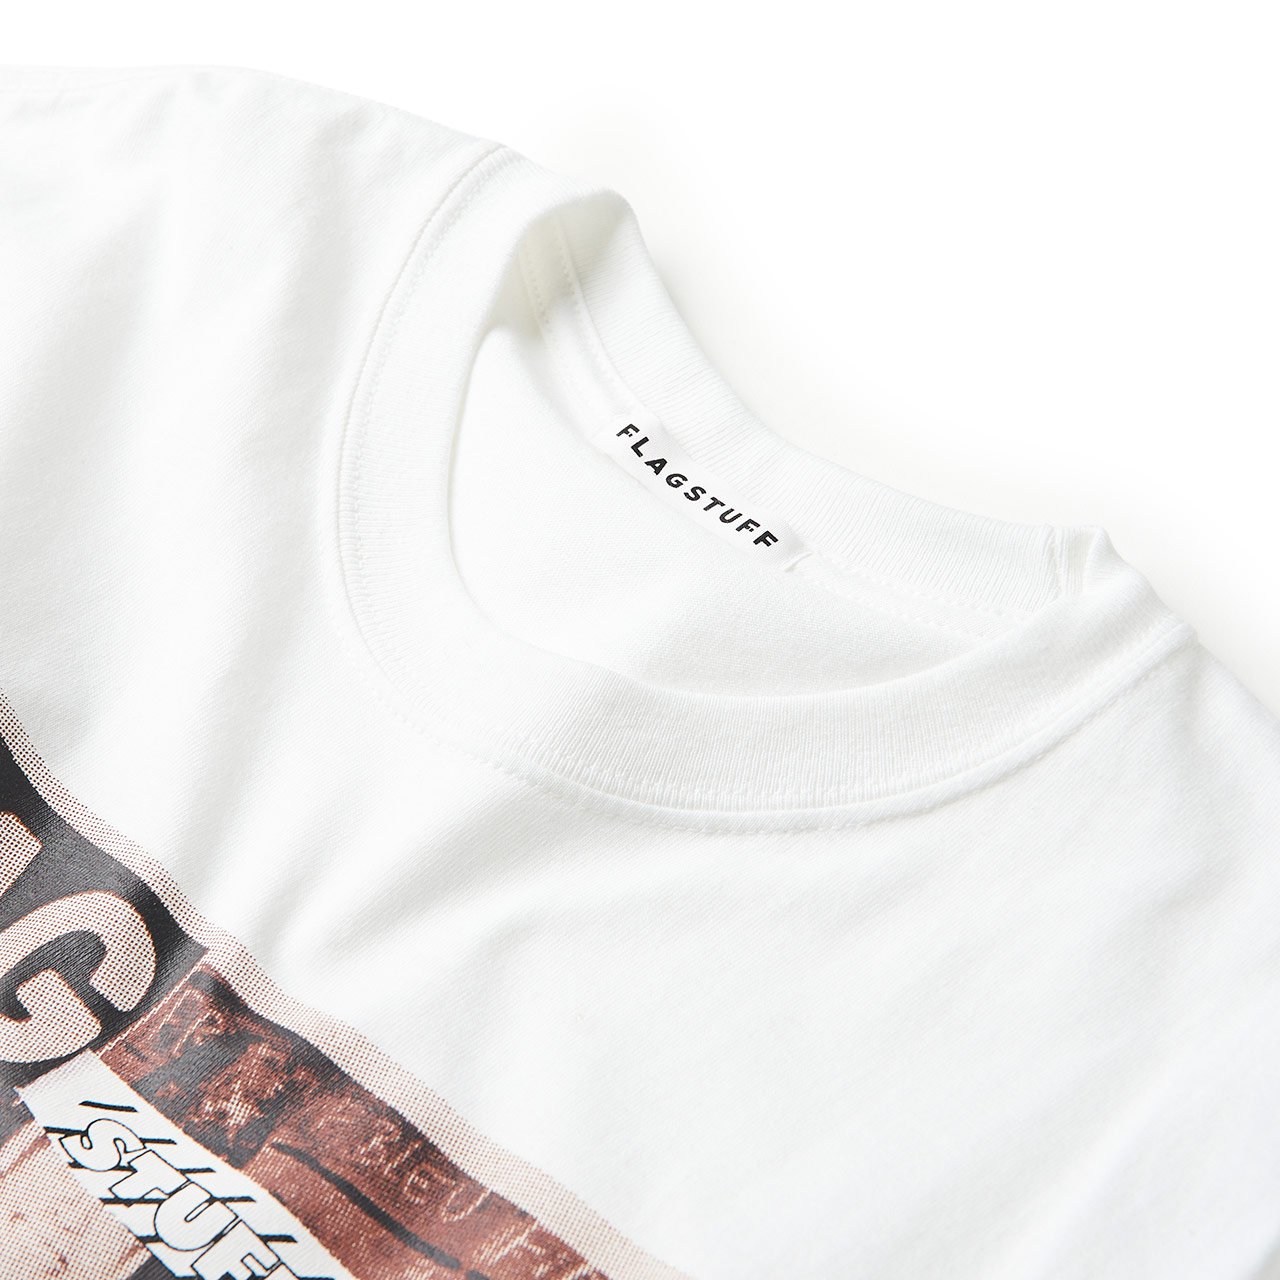 flagstuff "cut up" s/s tee (white) - 20aw-fs-78 - a.plus - Image - 3